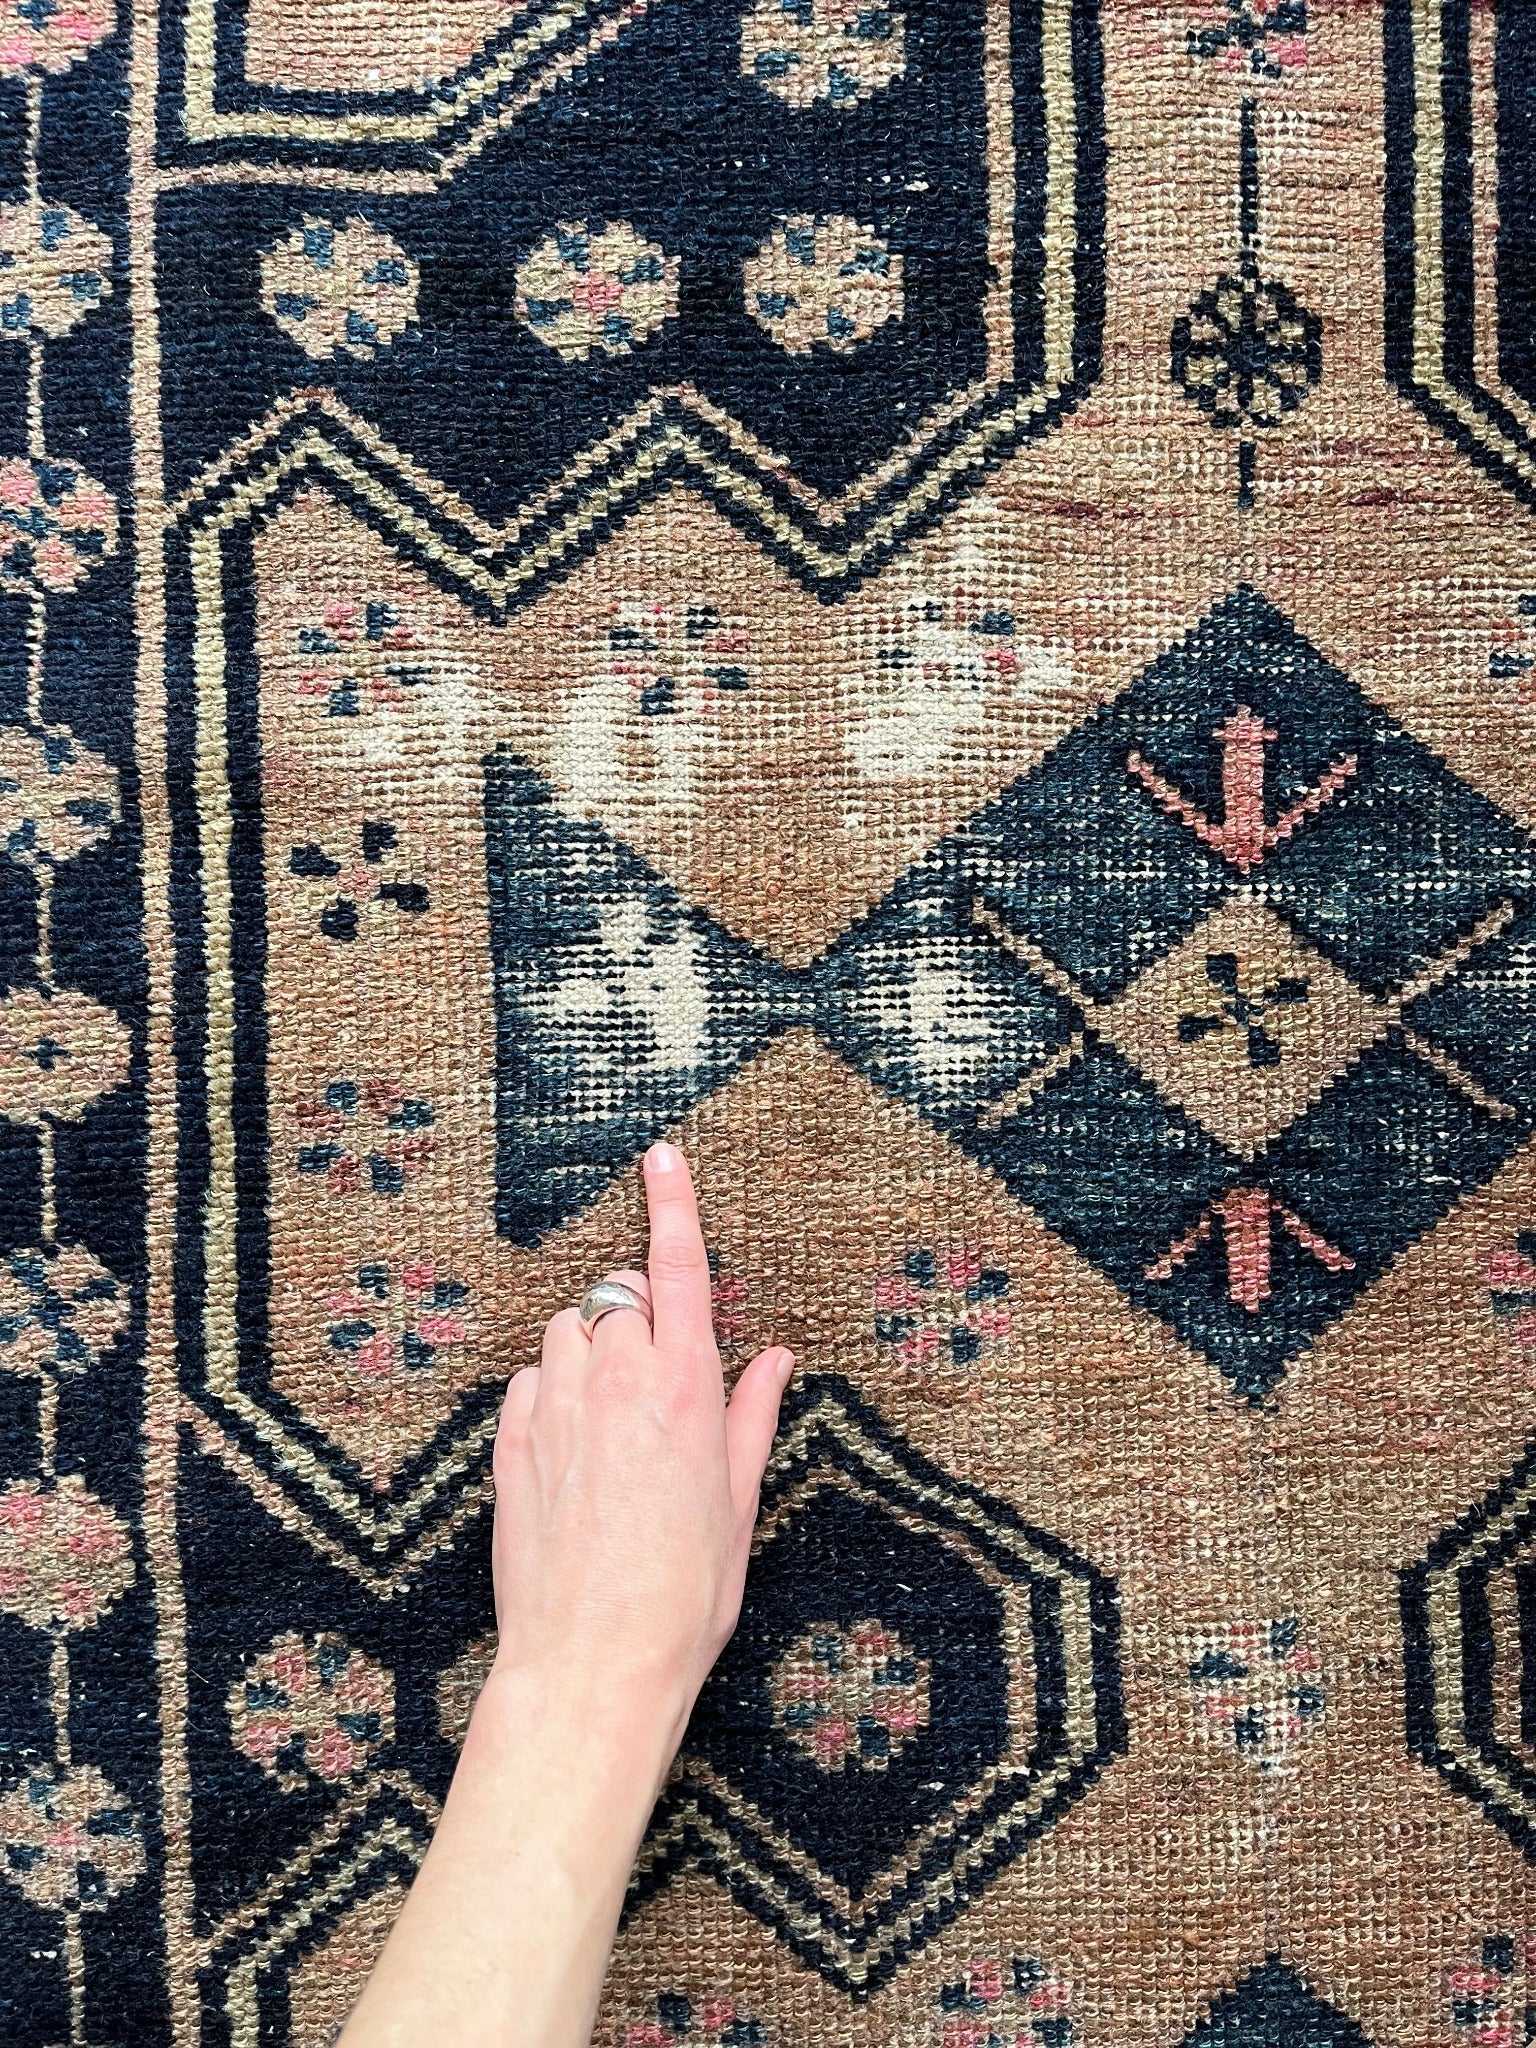 See Detail of Worn Spot on Arbor Persian Rug